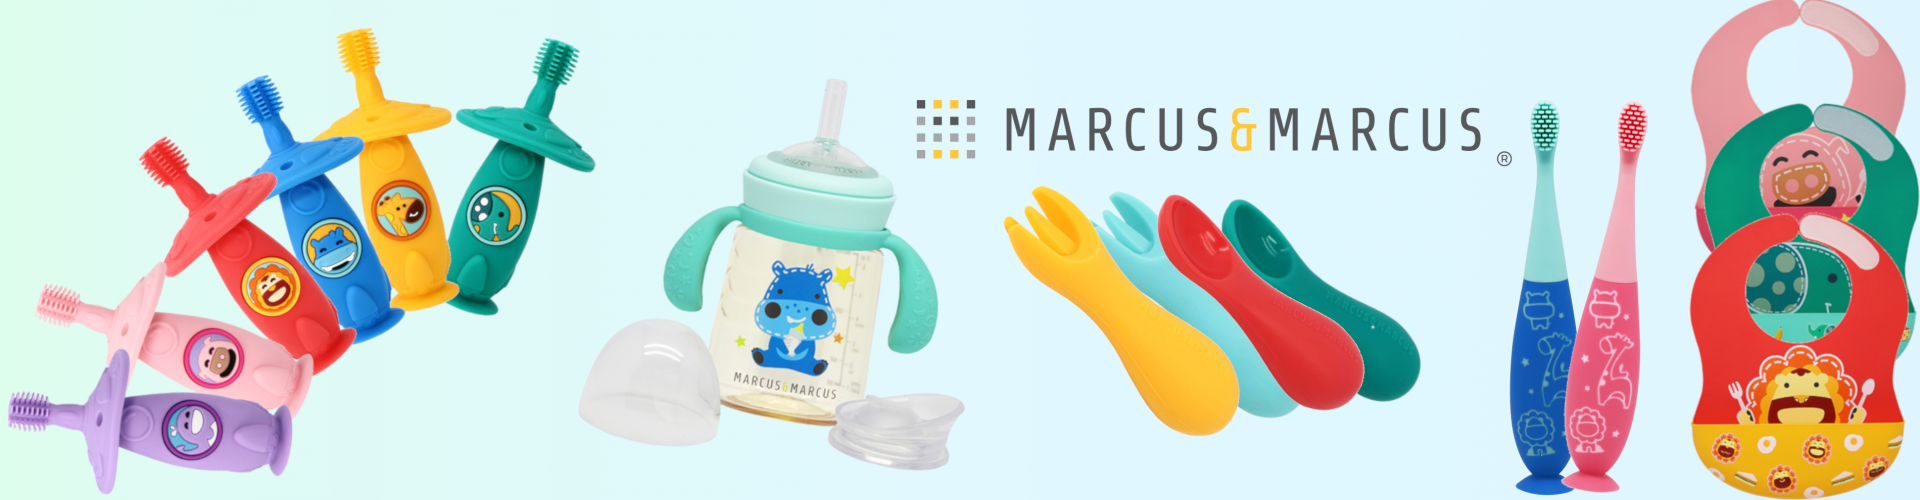 Marcus and Marcus Baltic - Baby products online store